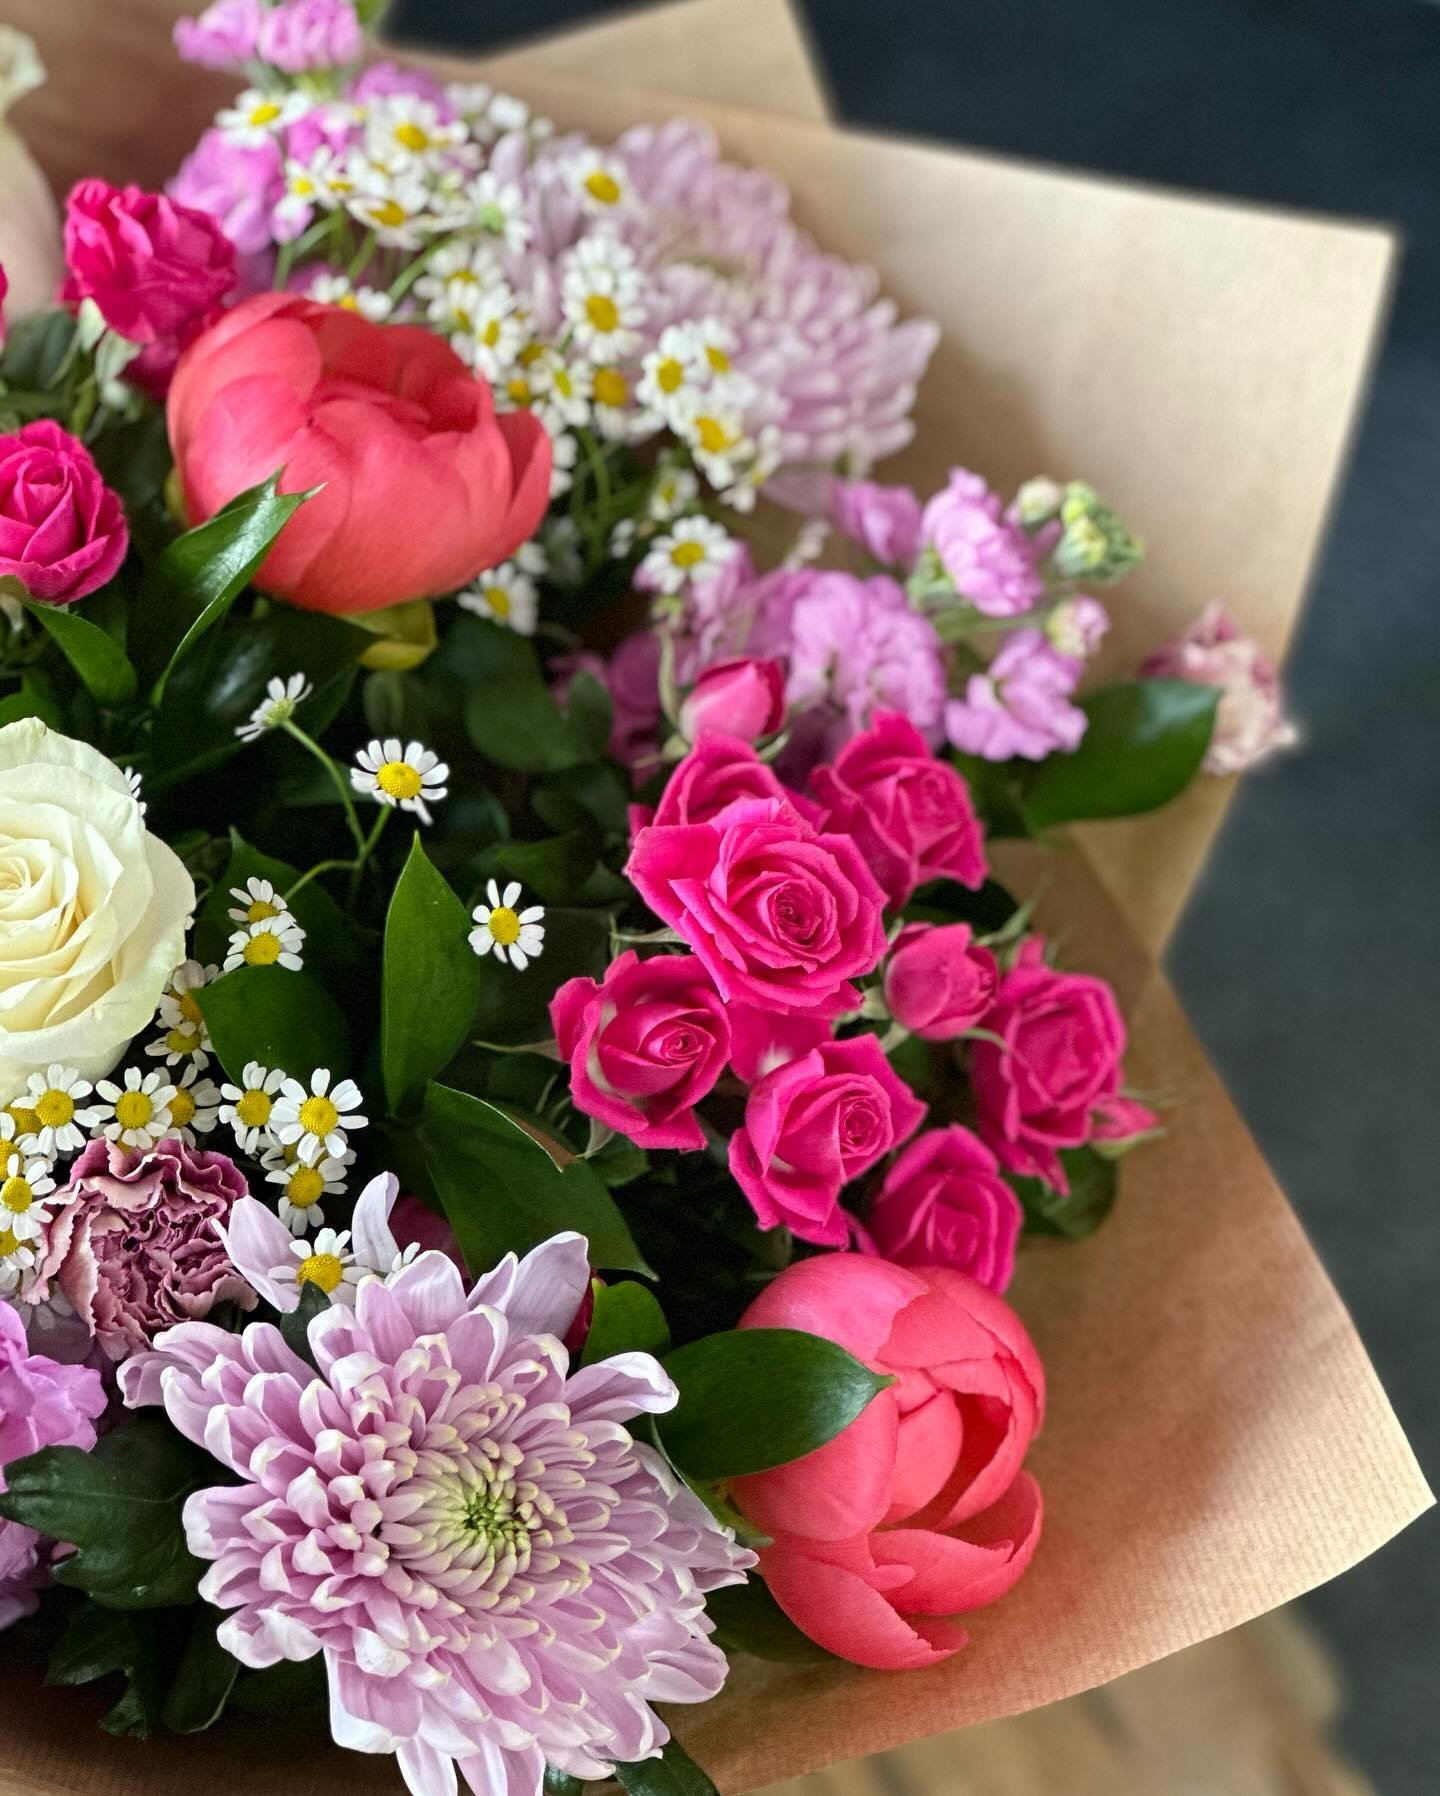 💗ON WEDNESDAYS WE WEAR PINK💗

And if you know the reference to the above quote then we can be friends lol 😂 

A beautiful bouquet full of beautiful pinks 🫶